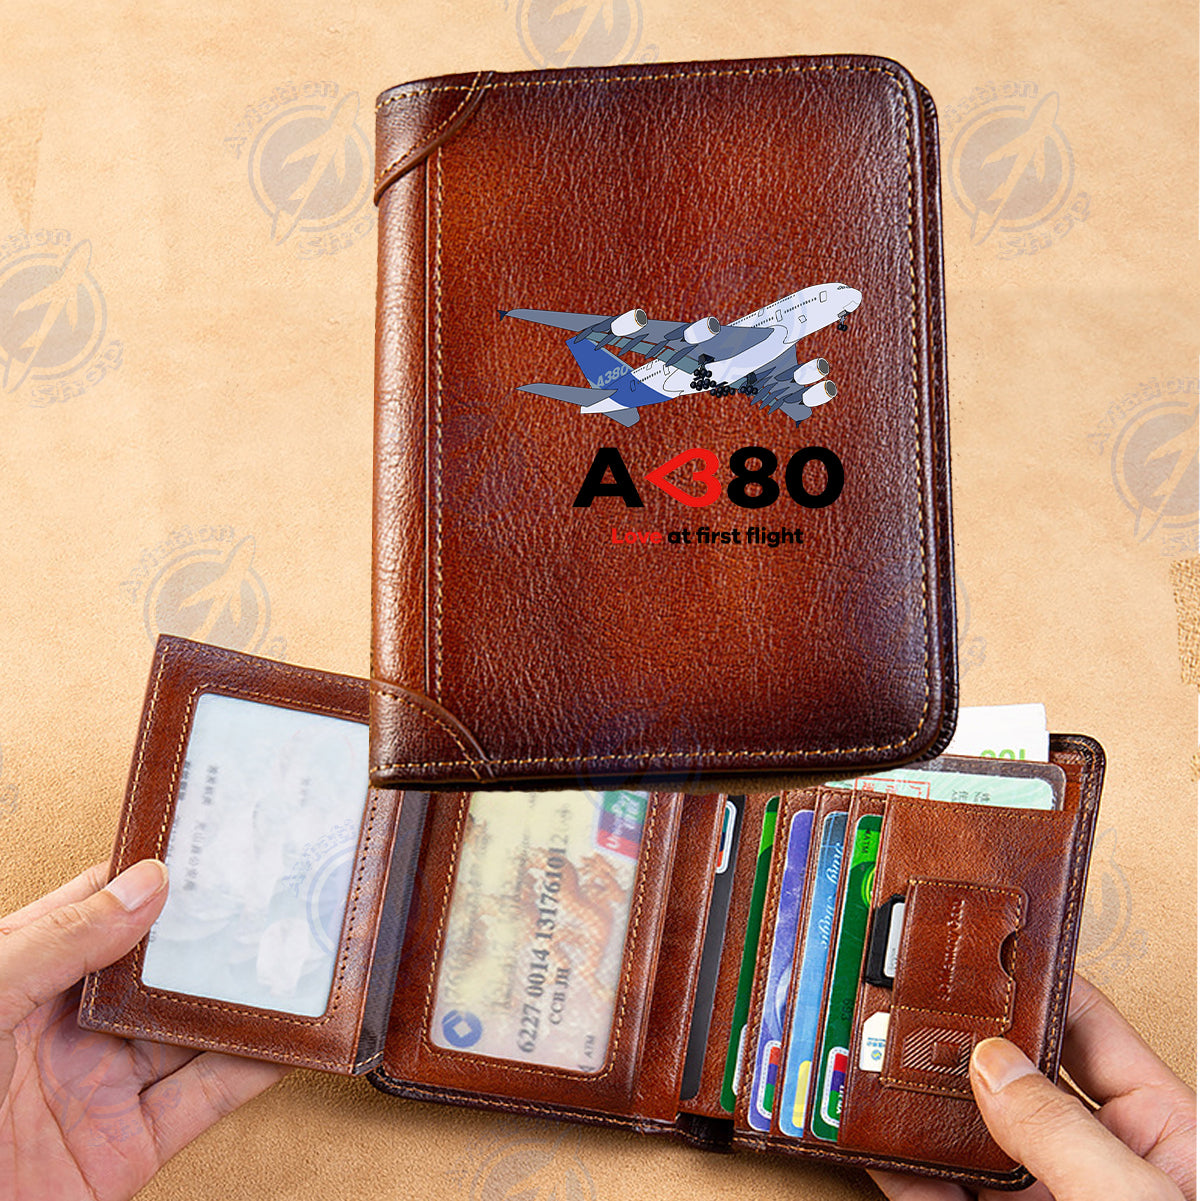 Airbus A380 Love at first flight Designed Leather Wallets